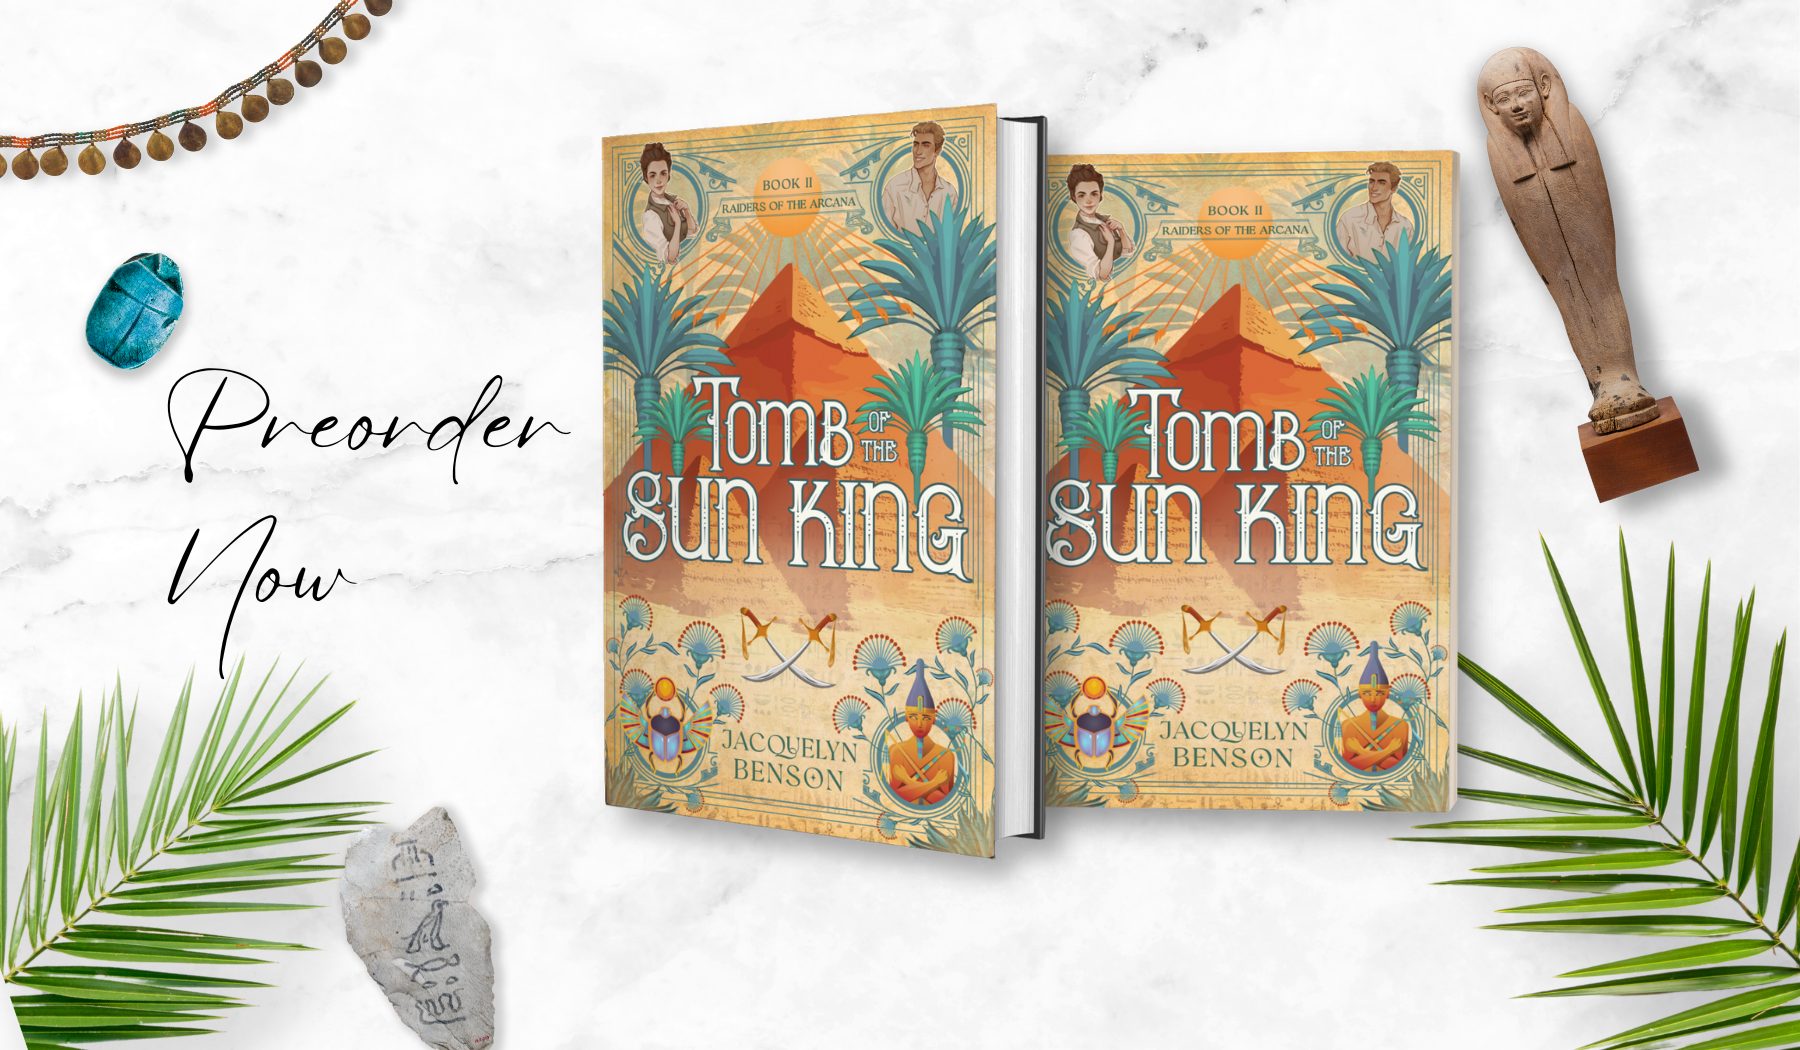 Preorder Now with Tomb of the Sun King paperback and hardcover